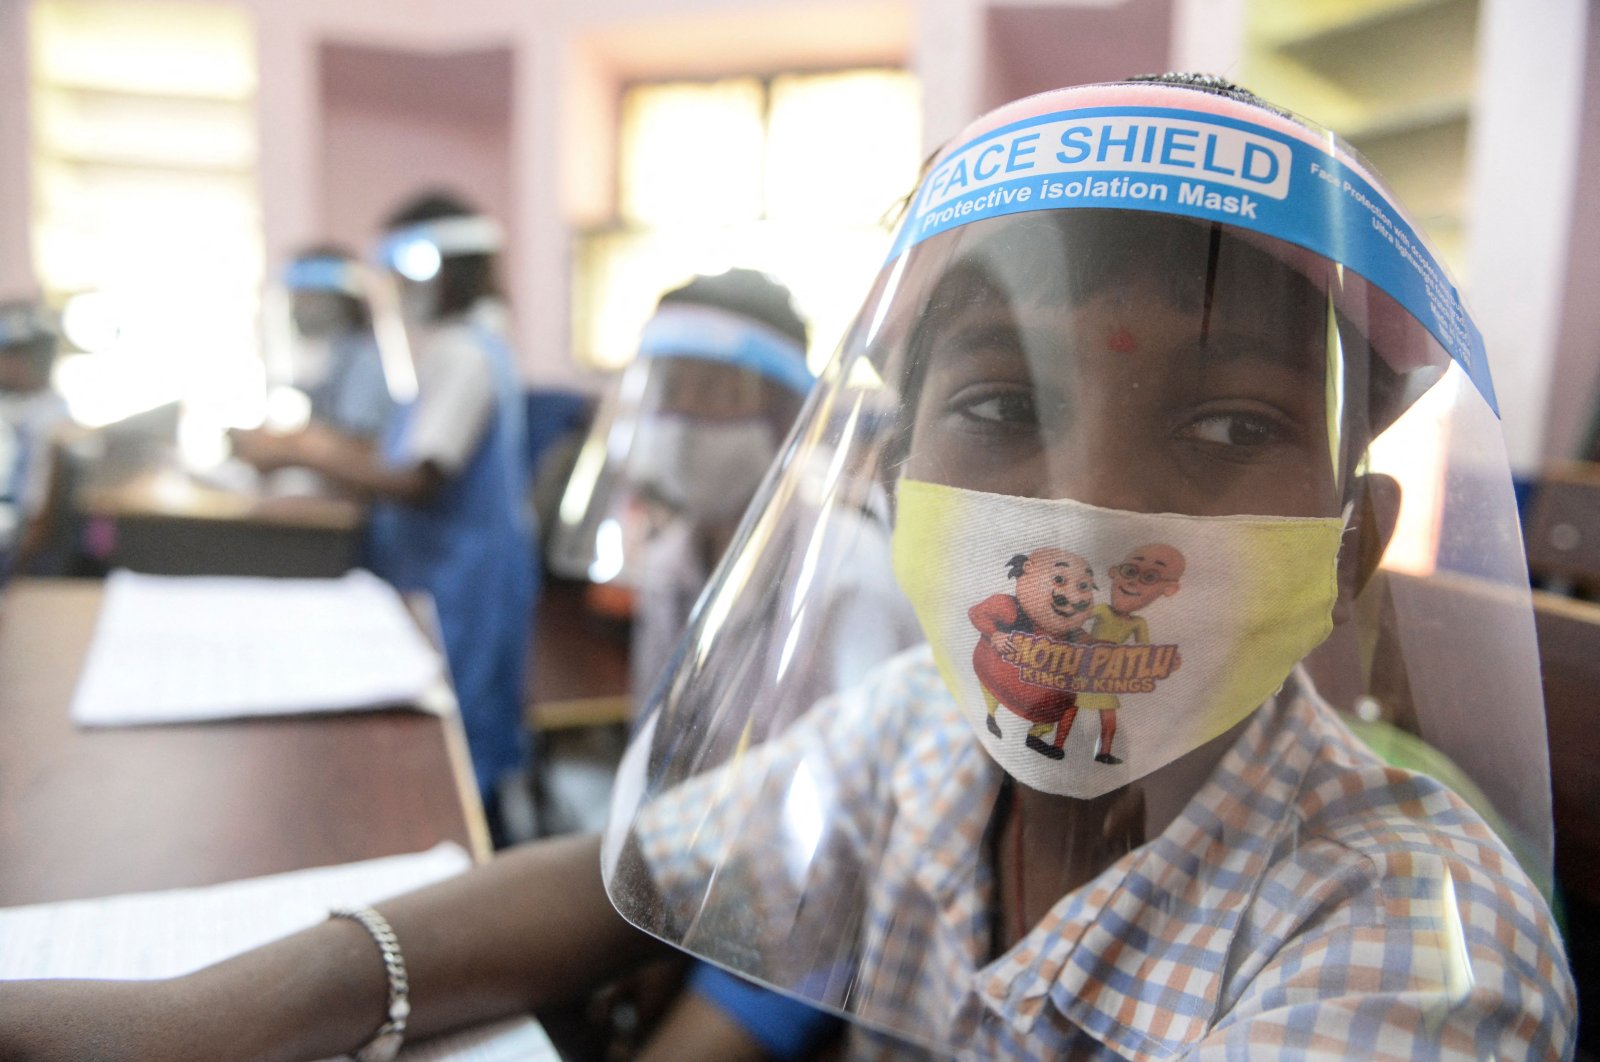 A student wearing facemasks and face-shield attends a class after the reopening of schools closed as a preventive measure to curb the spread of COVID-19, at a government girls primary school in Hyderabad, India on Feb. 11, 2022. (AFP Photo)